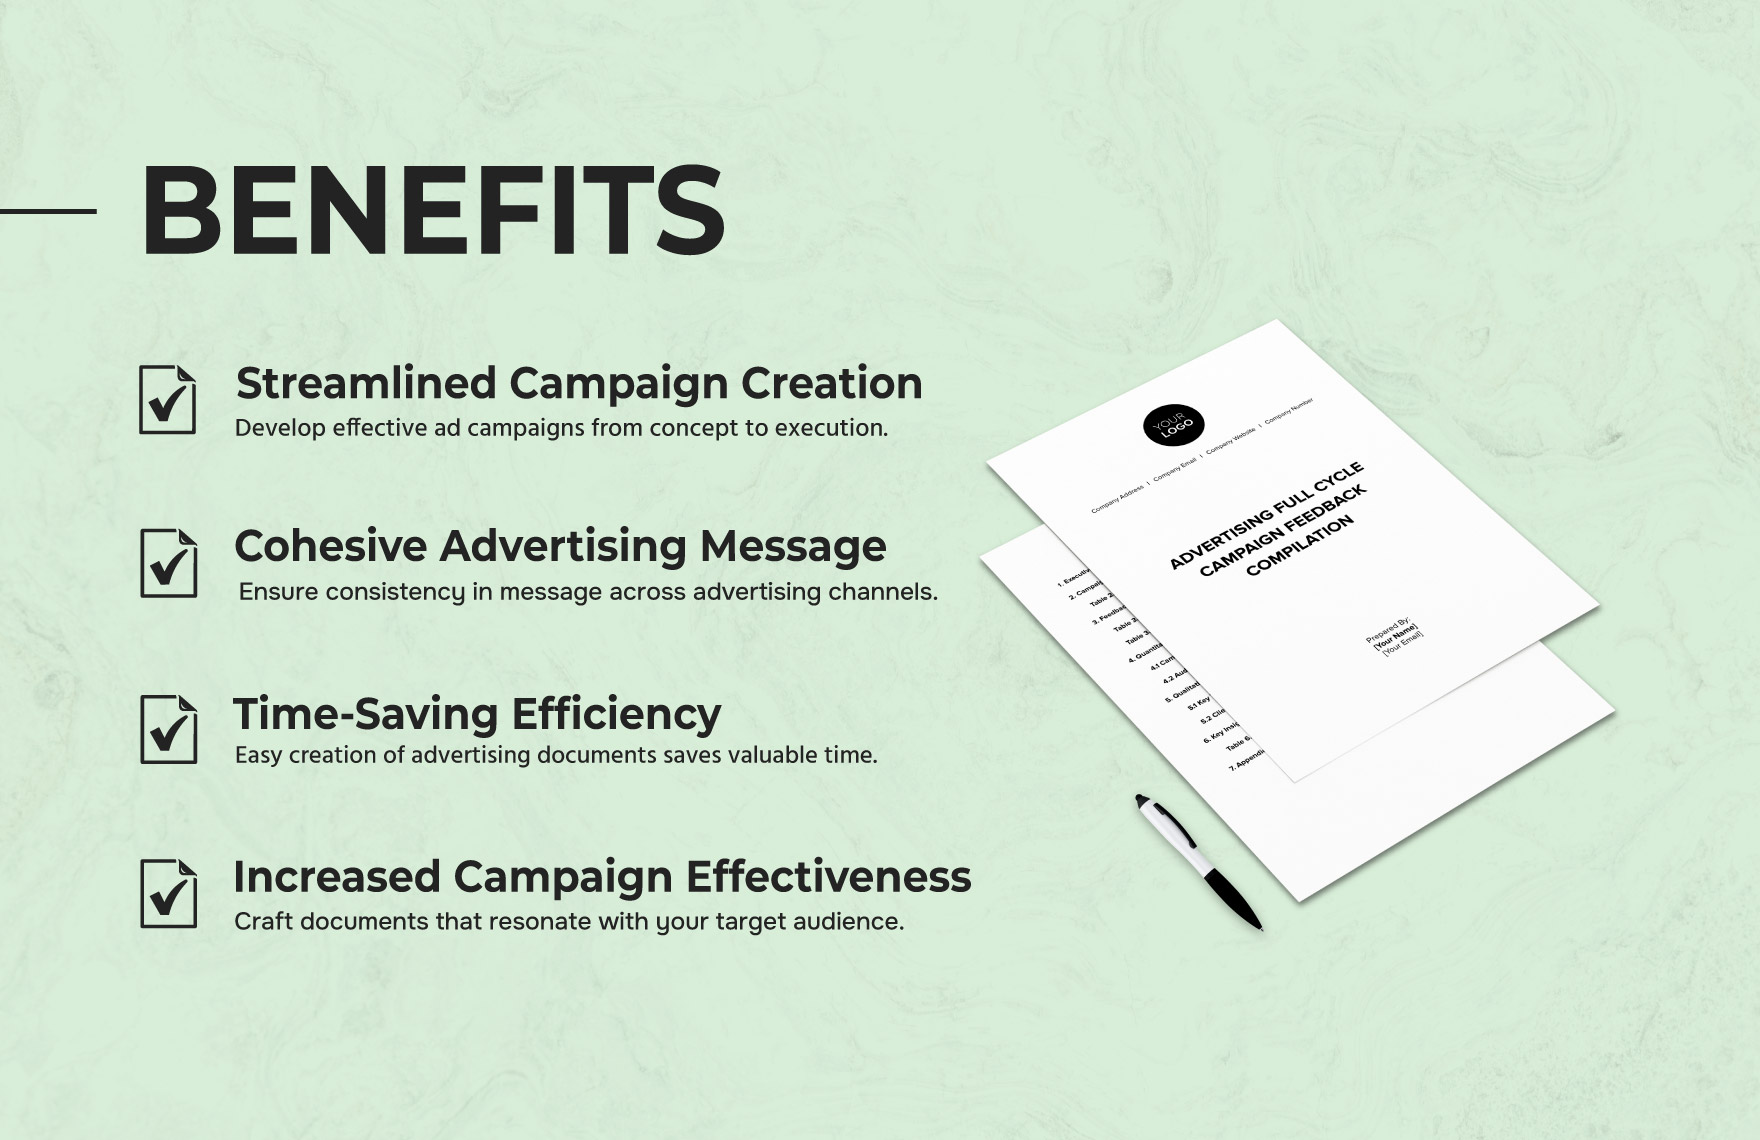 Advertising Full Cycle Campaign Feedback Compilation Template